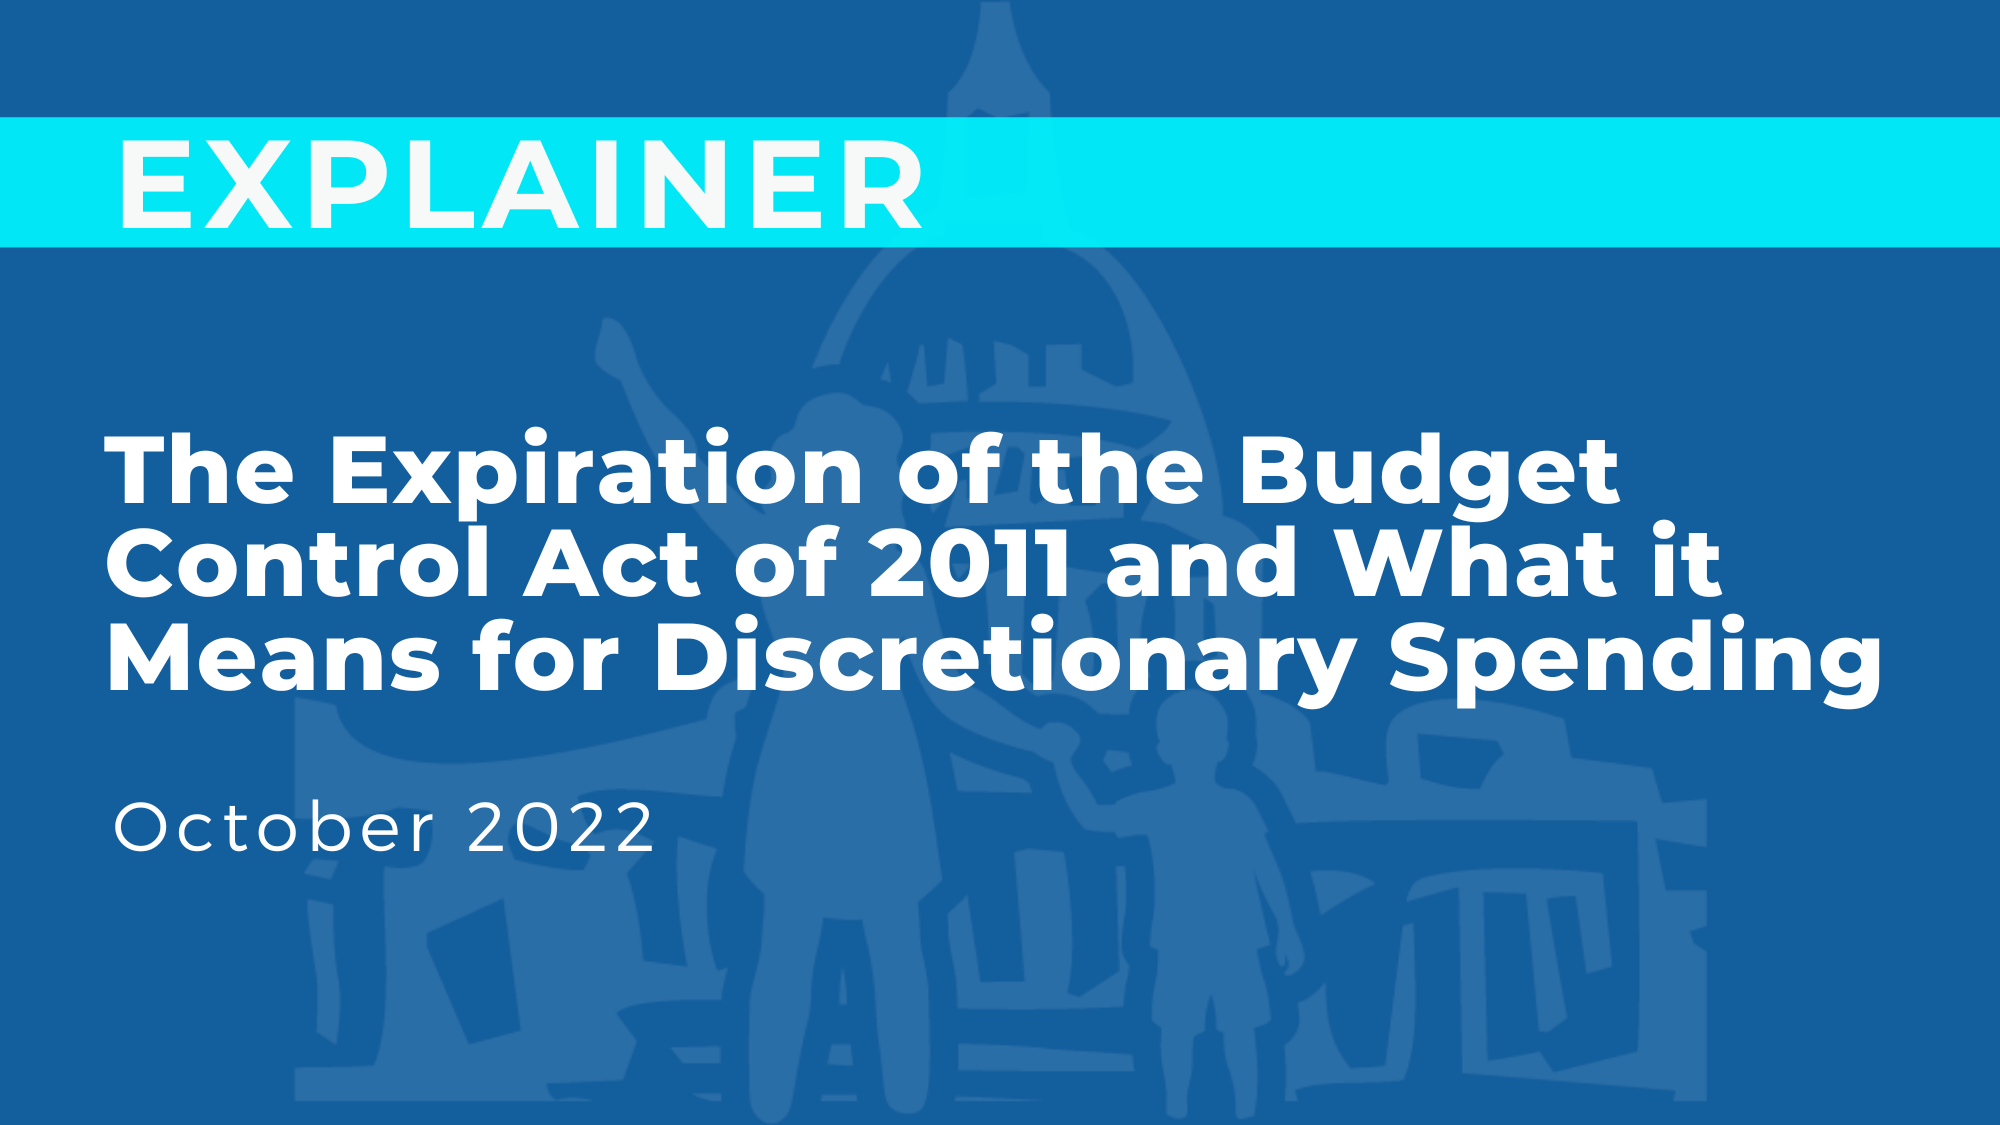 The Expiration of the Budget Control Act of 2011 and What it Means for Discretionary Spending